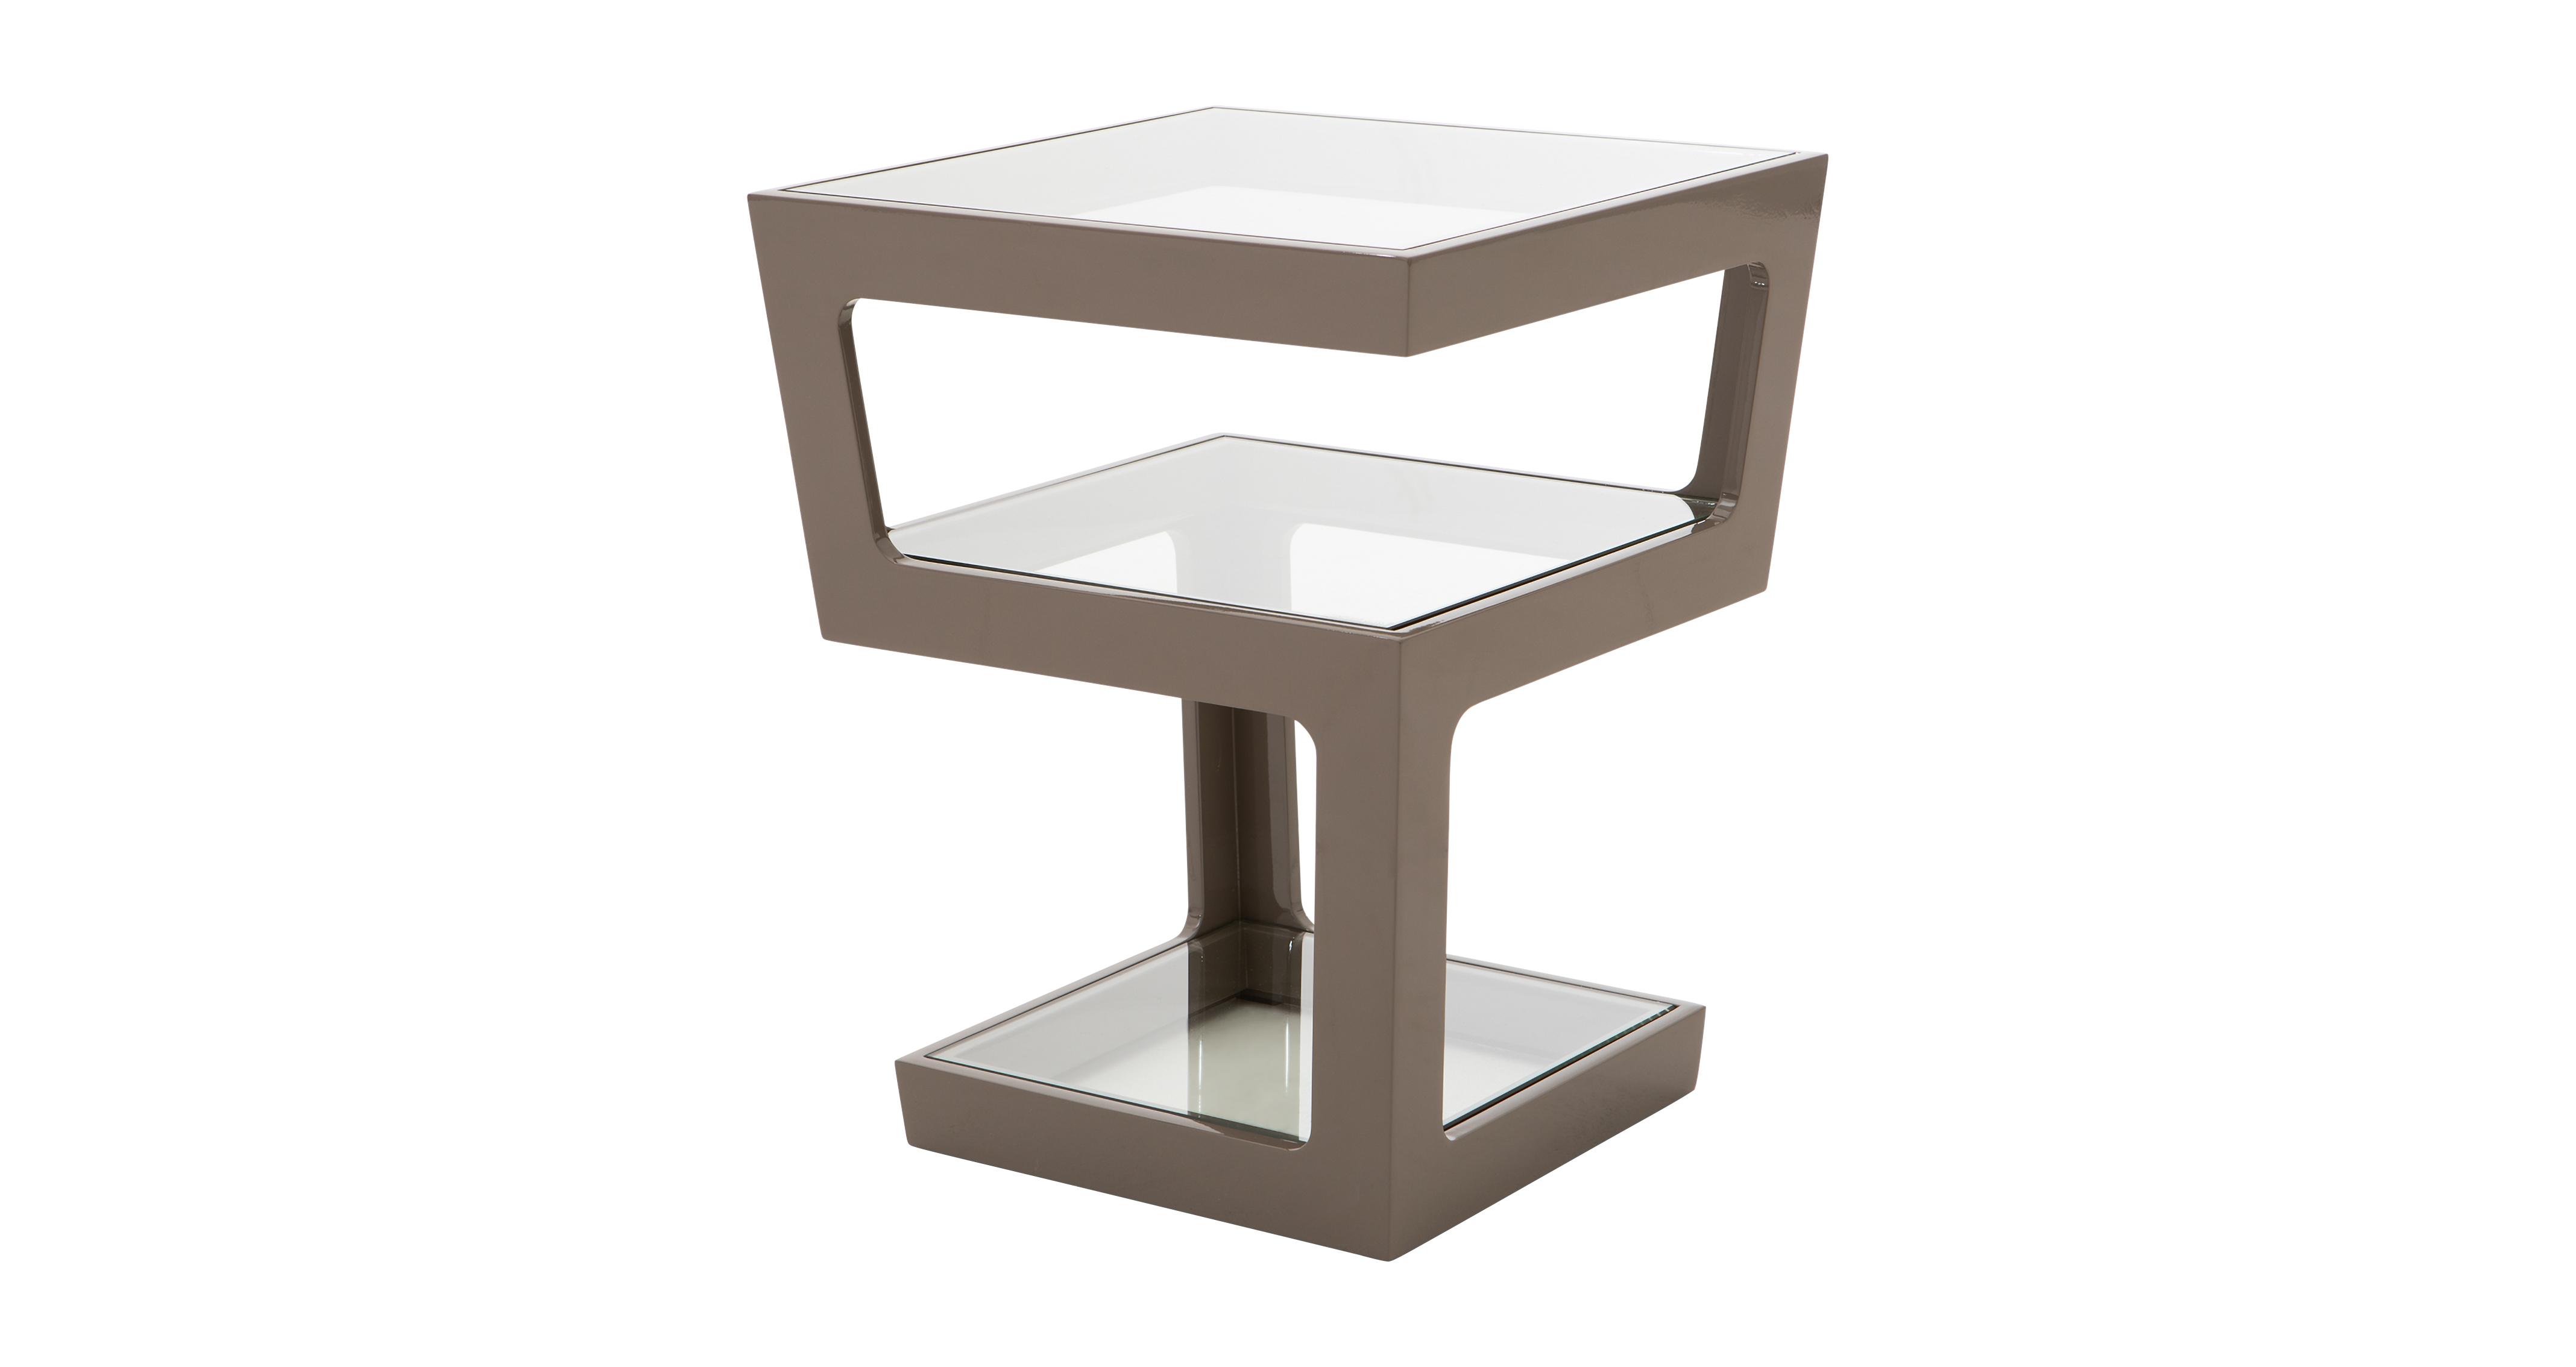 Dwell WHITE GLOSS AND GLASS 43cm SQUARE TABLE FROM "DWELL" 